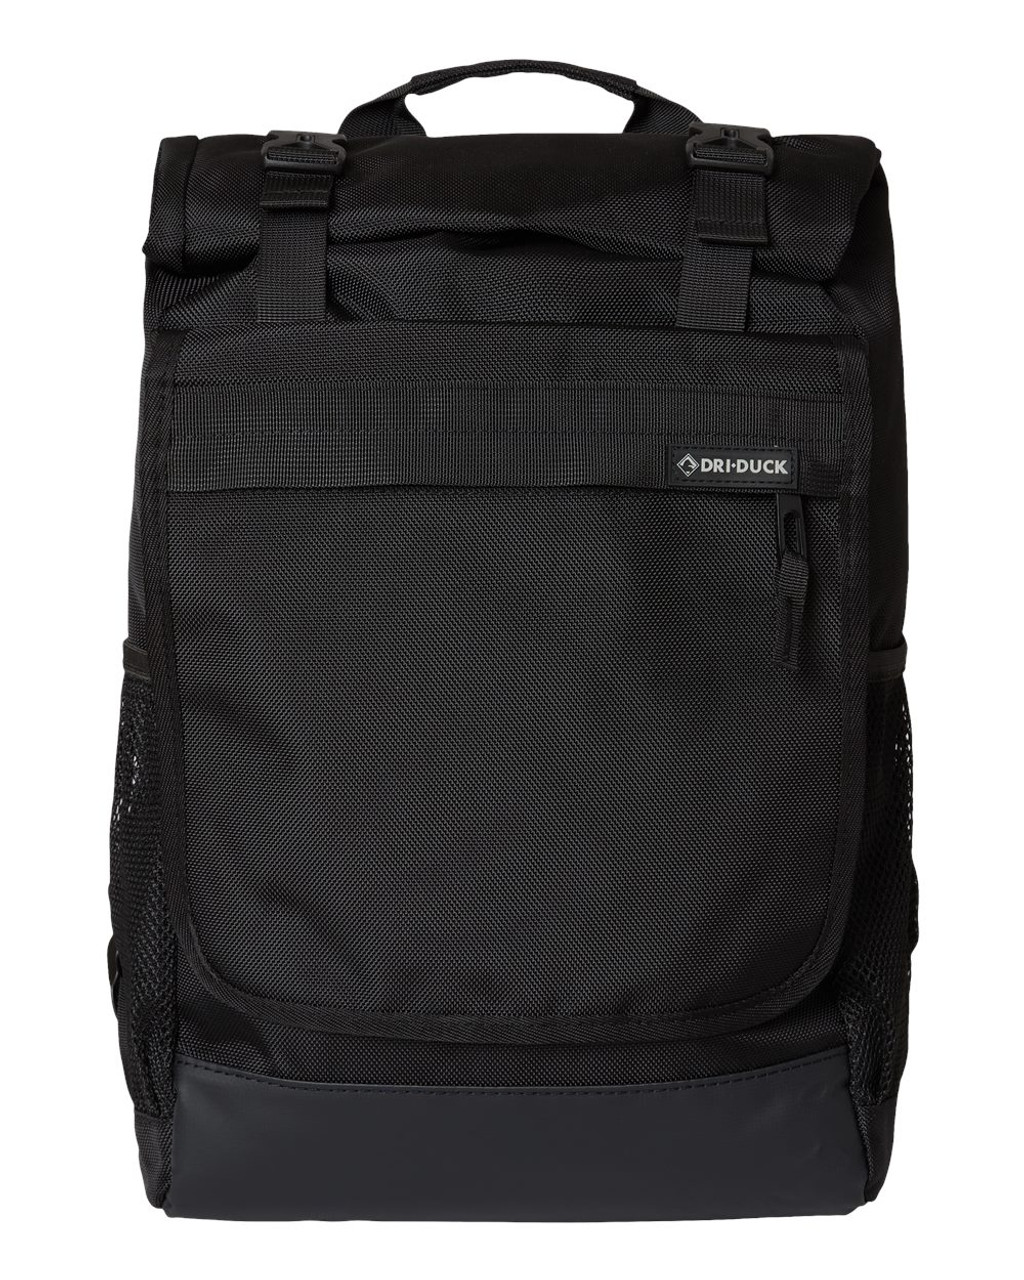 Roll Top Backpack - 1410 1410S Black